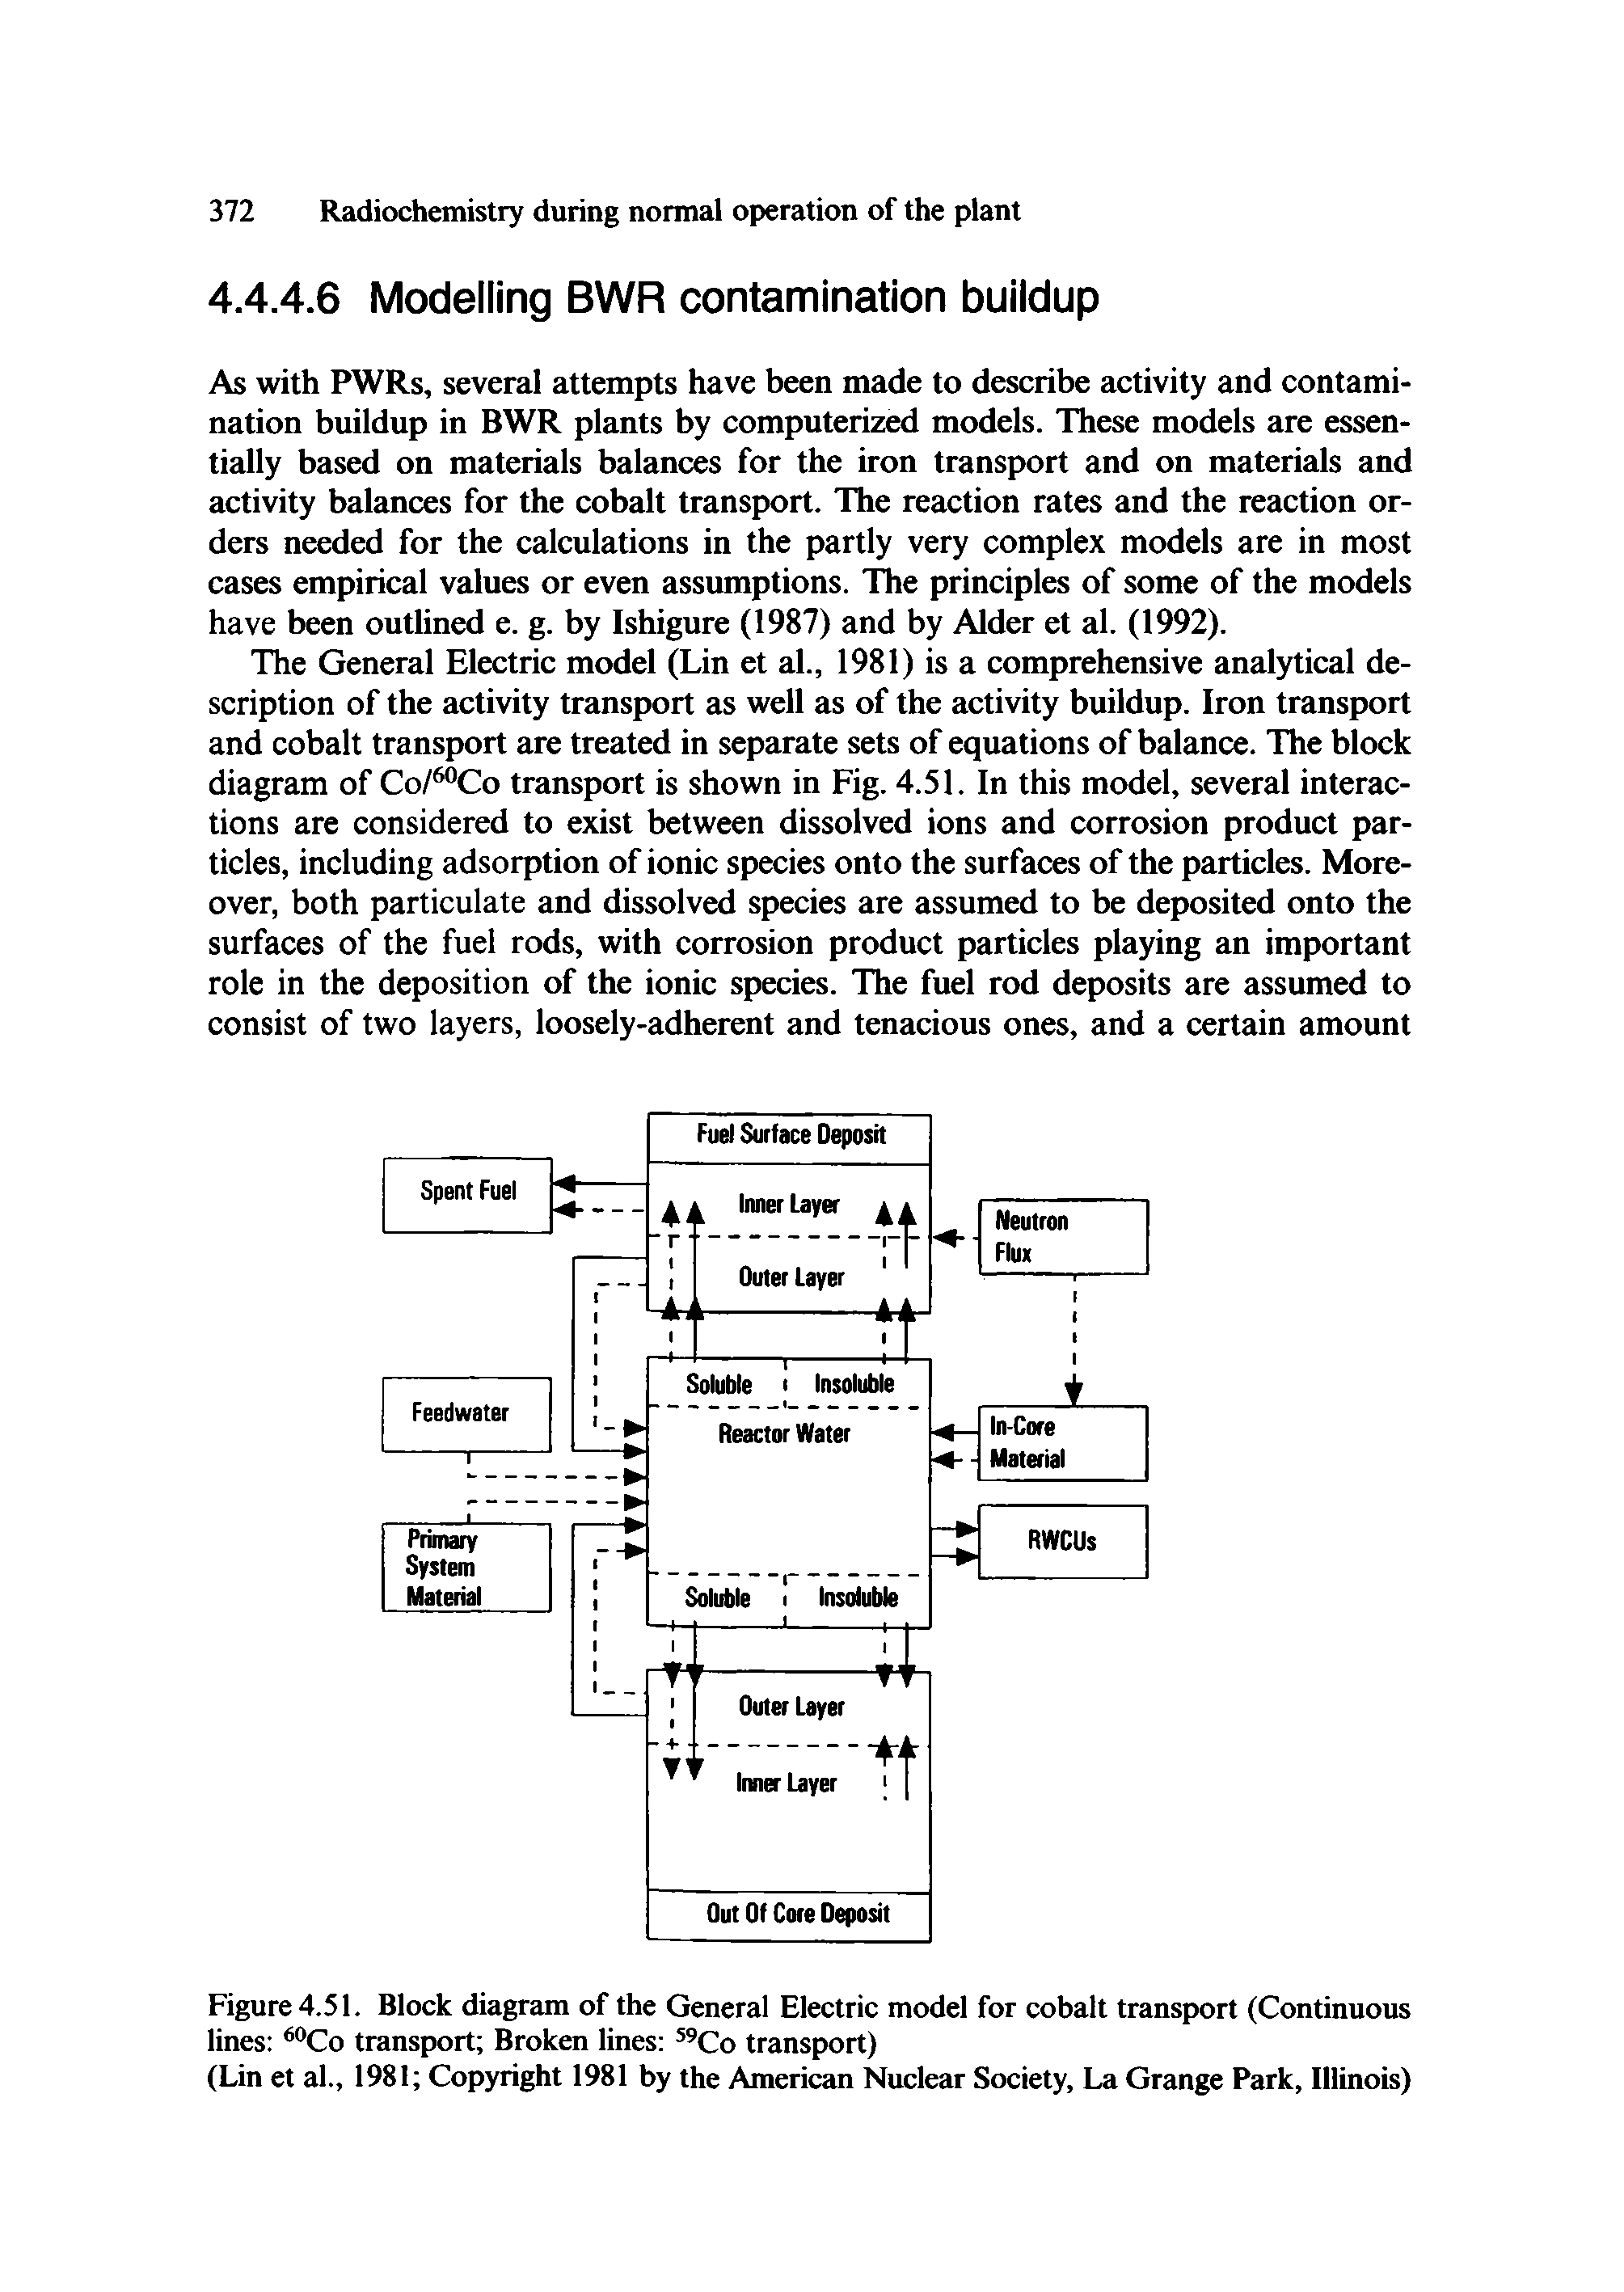 Figure 4.51. Block diagram of the General Electric model for cobalt transport (Continuous lines Co transport Broken lines Co transport)...